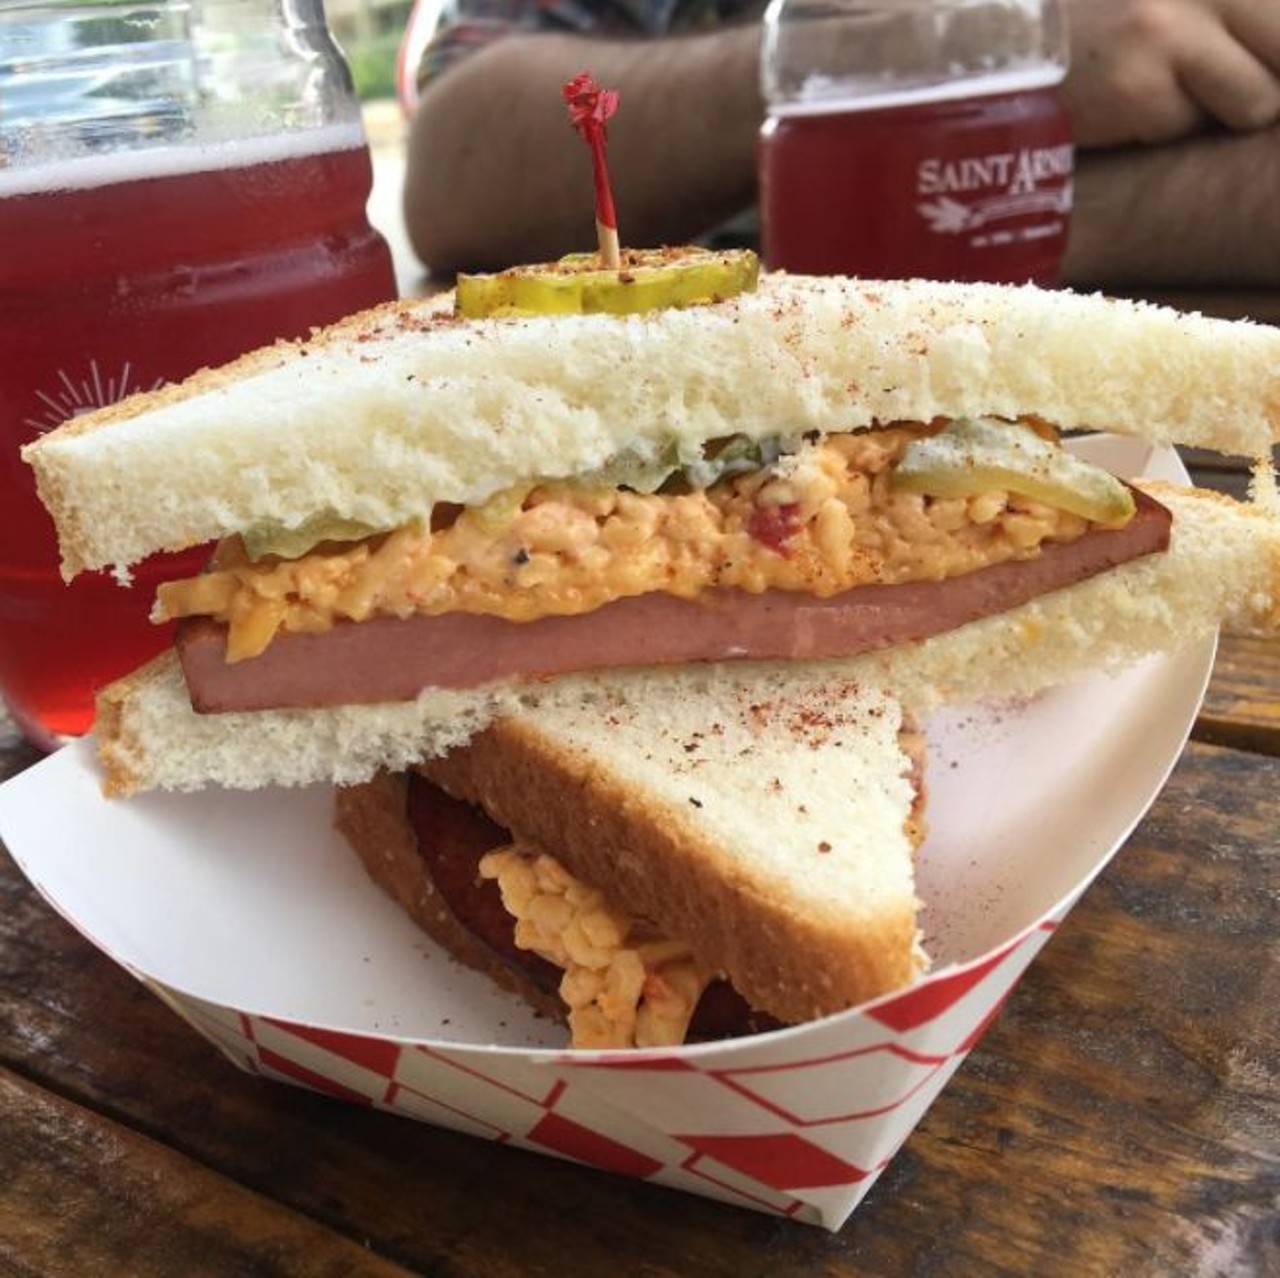  Fried Bologna Sandwich at Cullum&#146;s Attagirl Ice House
726 Mistletoe Ave., (210) 437-4263
The wings are tight, but you&#146;ll want to satisfy those munchie cravings with a fried bologna and pimento sandwich. It&#146;s deliciously trashy. 
Photo via Instagram, jesselizarraras